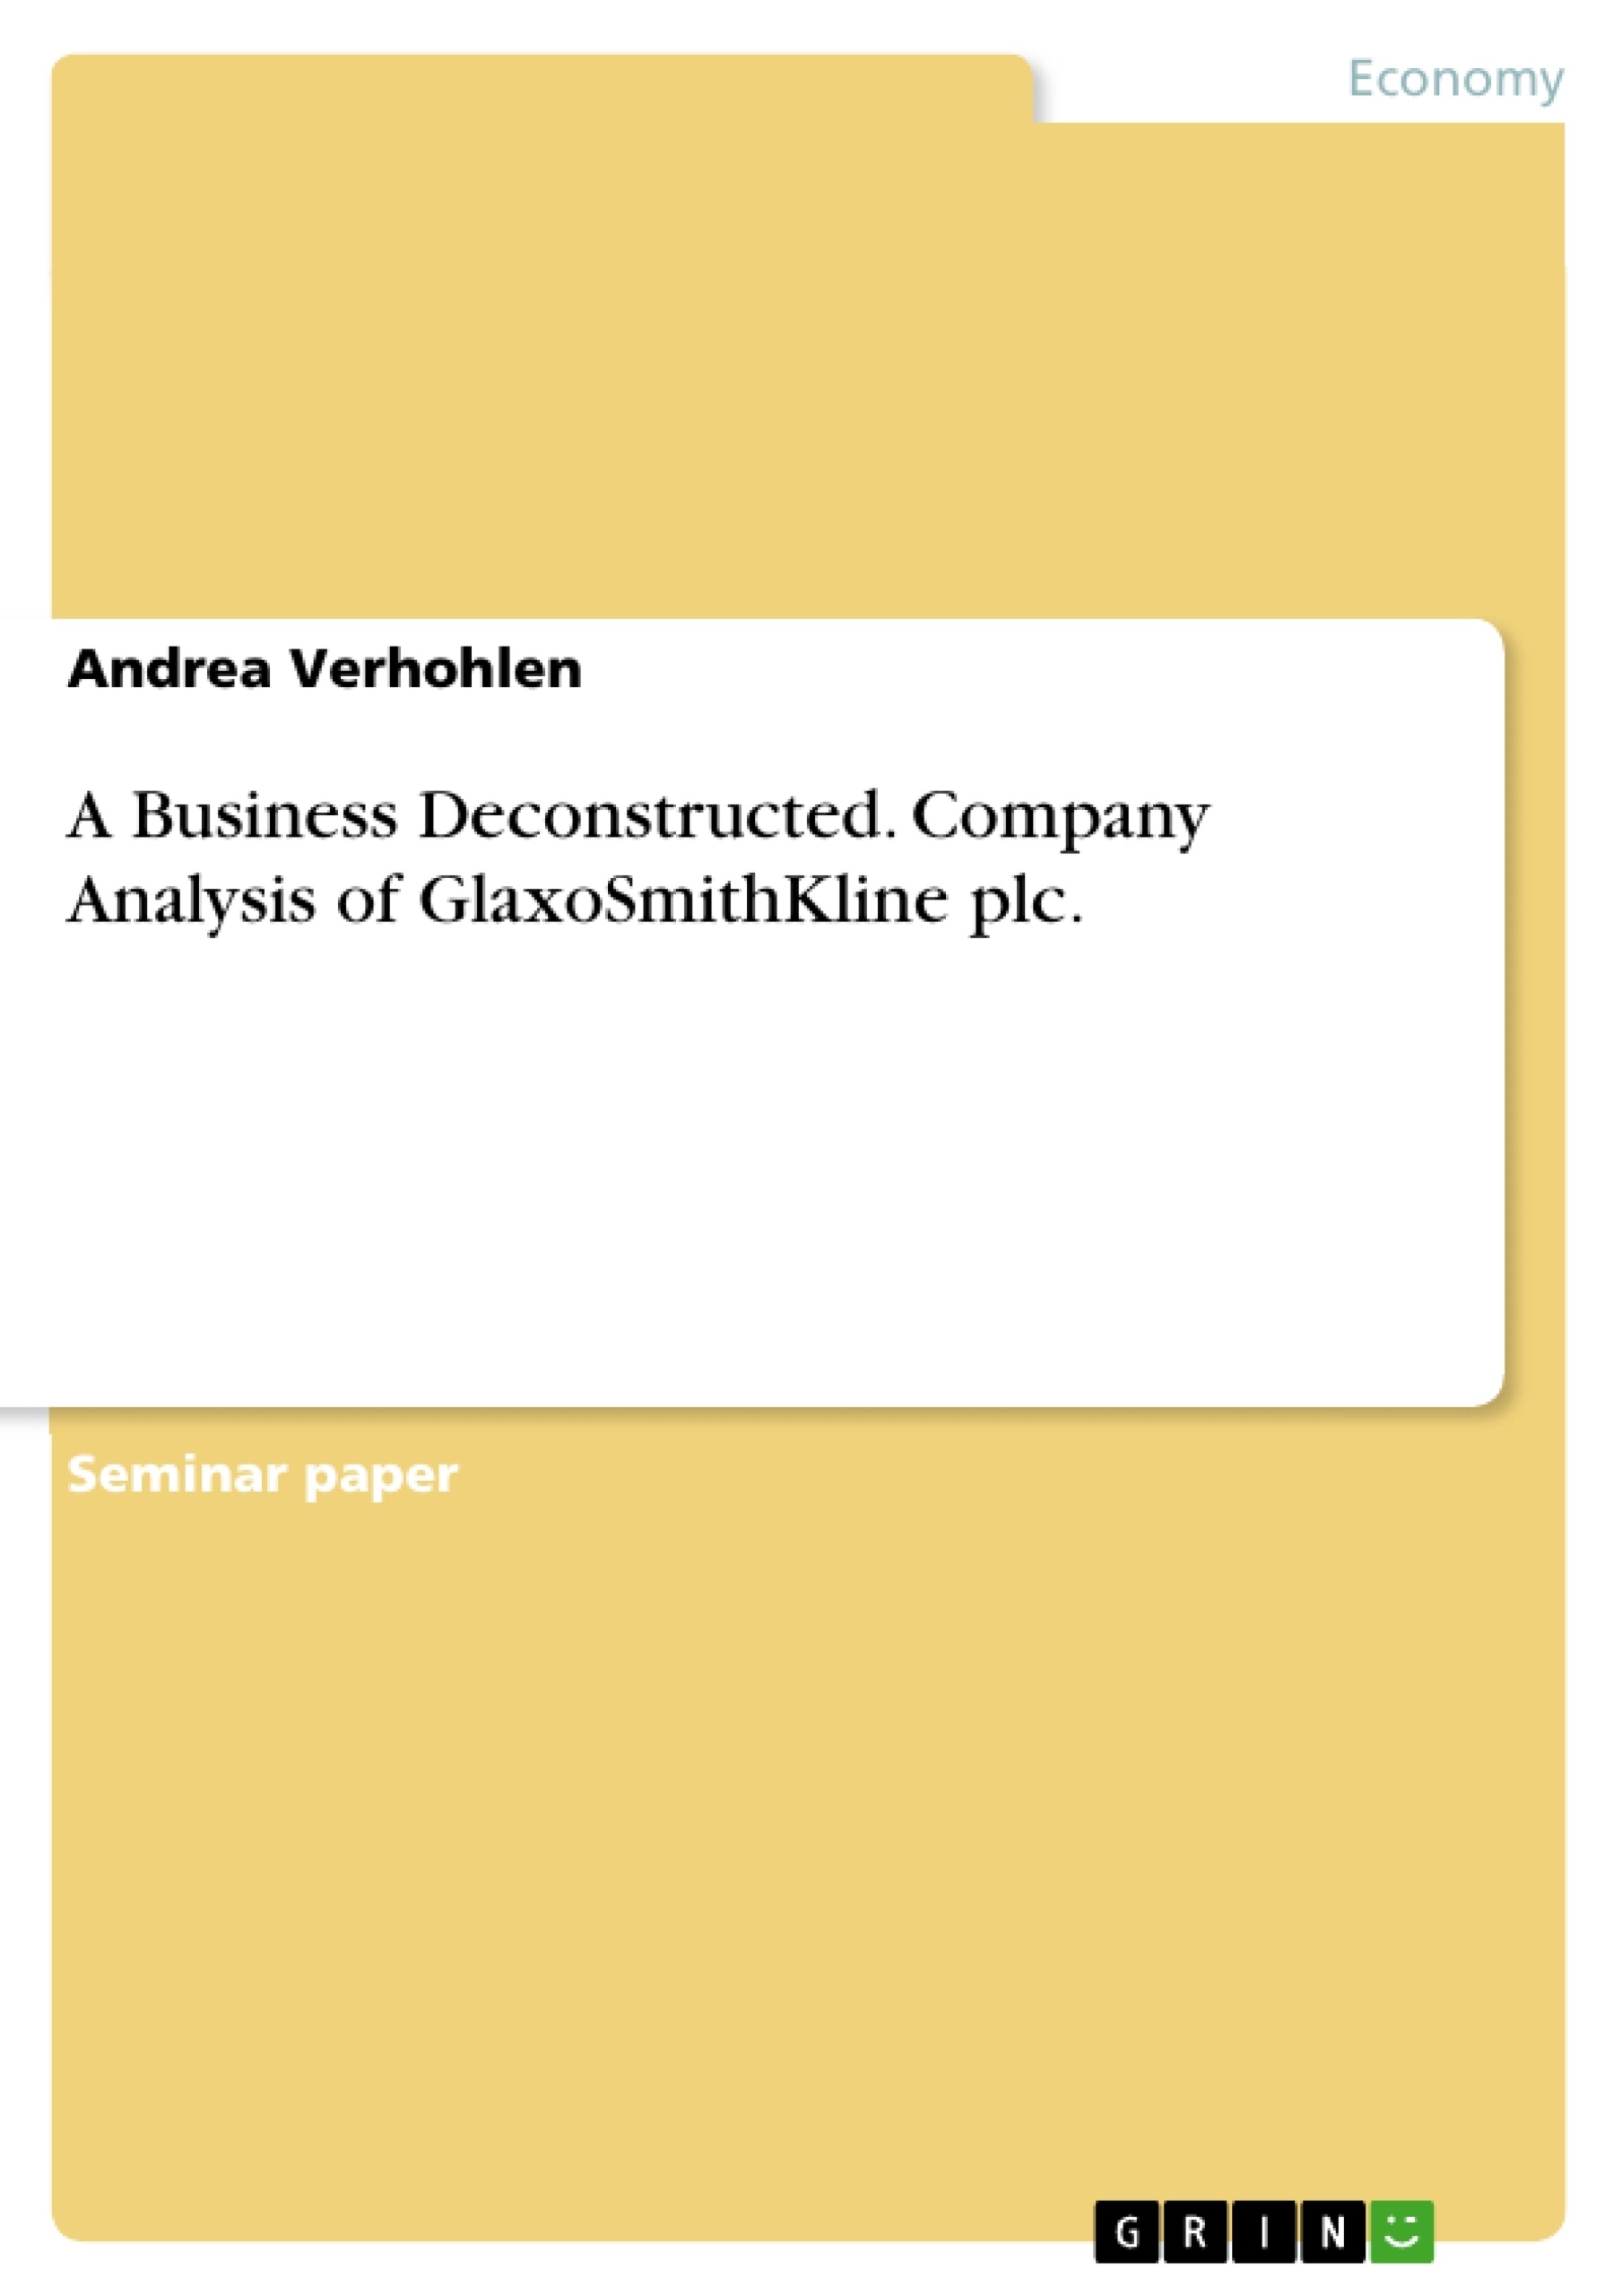 Titre: A Business Deconstructed. Company Analysis of GlaxoSmithKline plc.